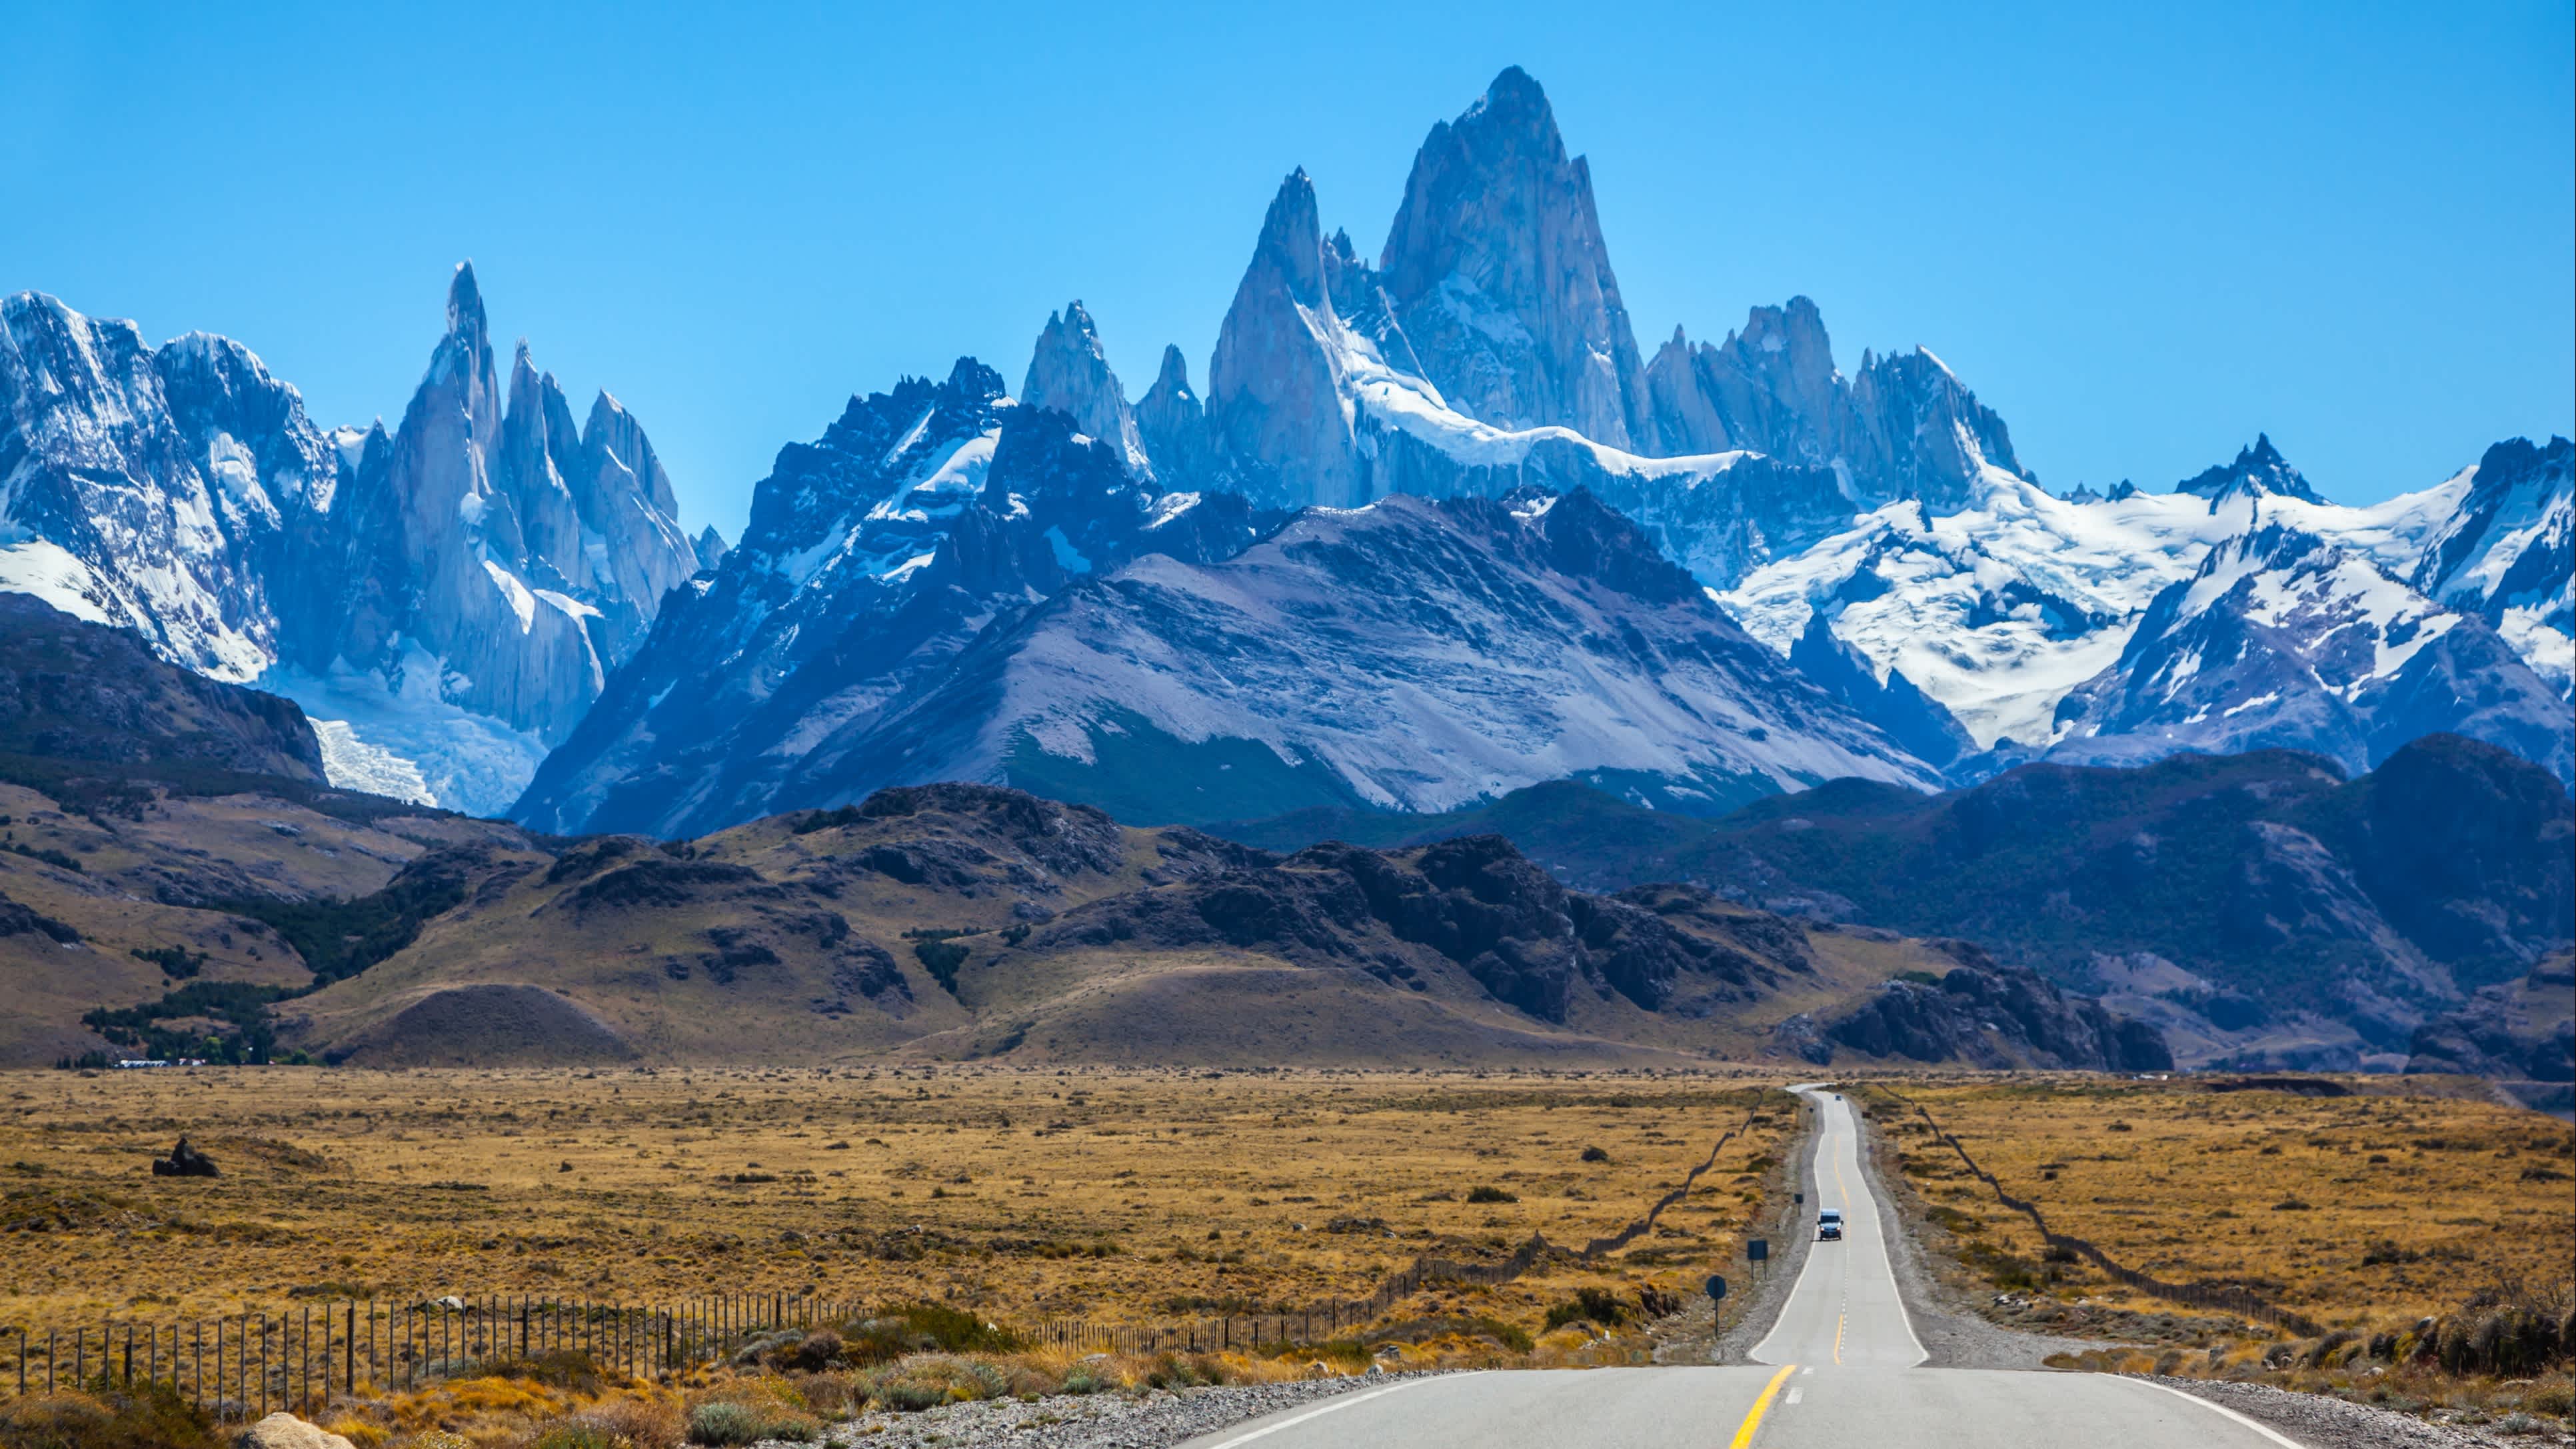 See Mount Fitzroy Peak in Argentina, pictured here in the sunlight, on a tour of Argentina and Chile